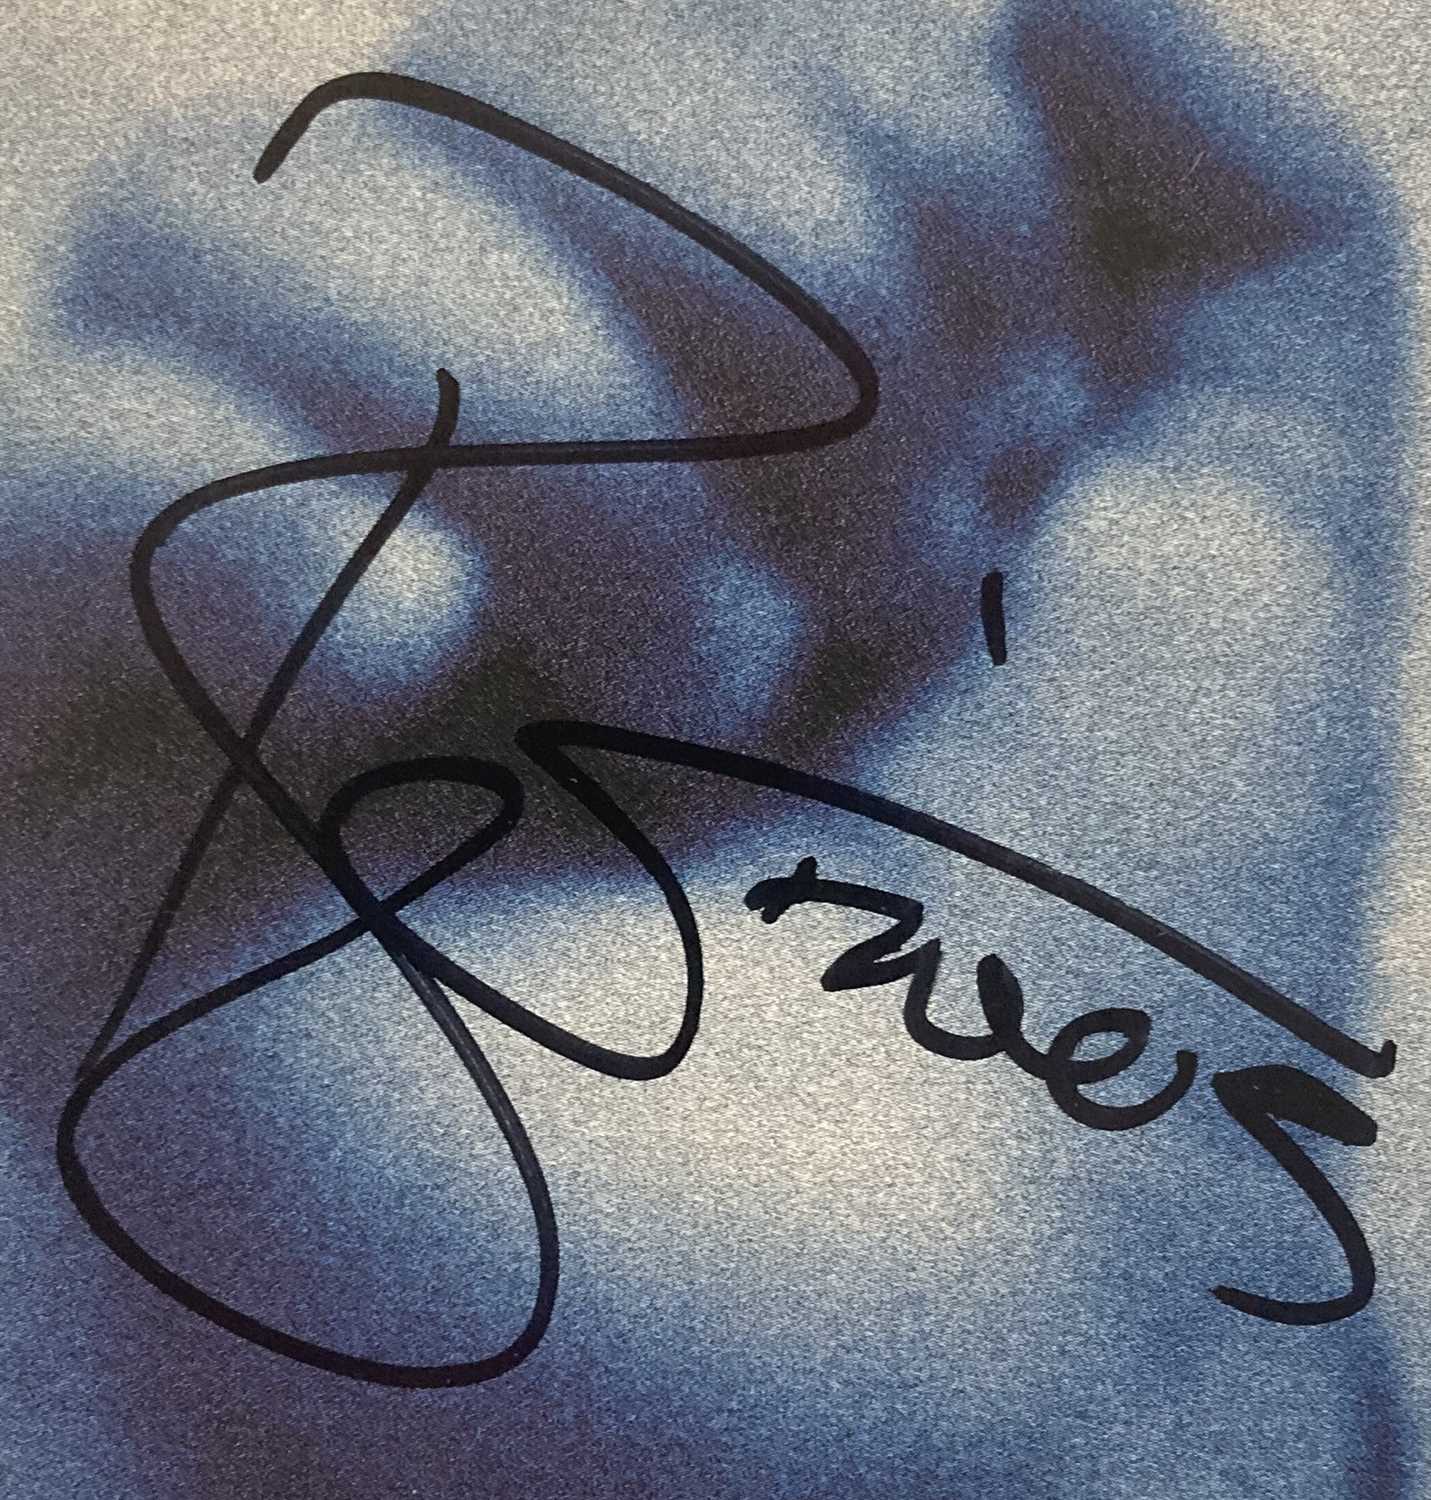 DAVID BOWIE SIGNED POSTCARD - Image 2 of 5